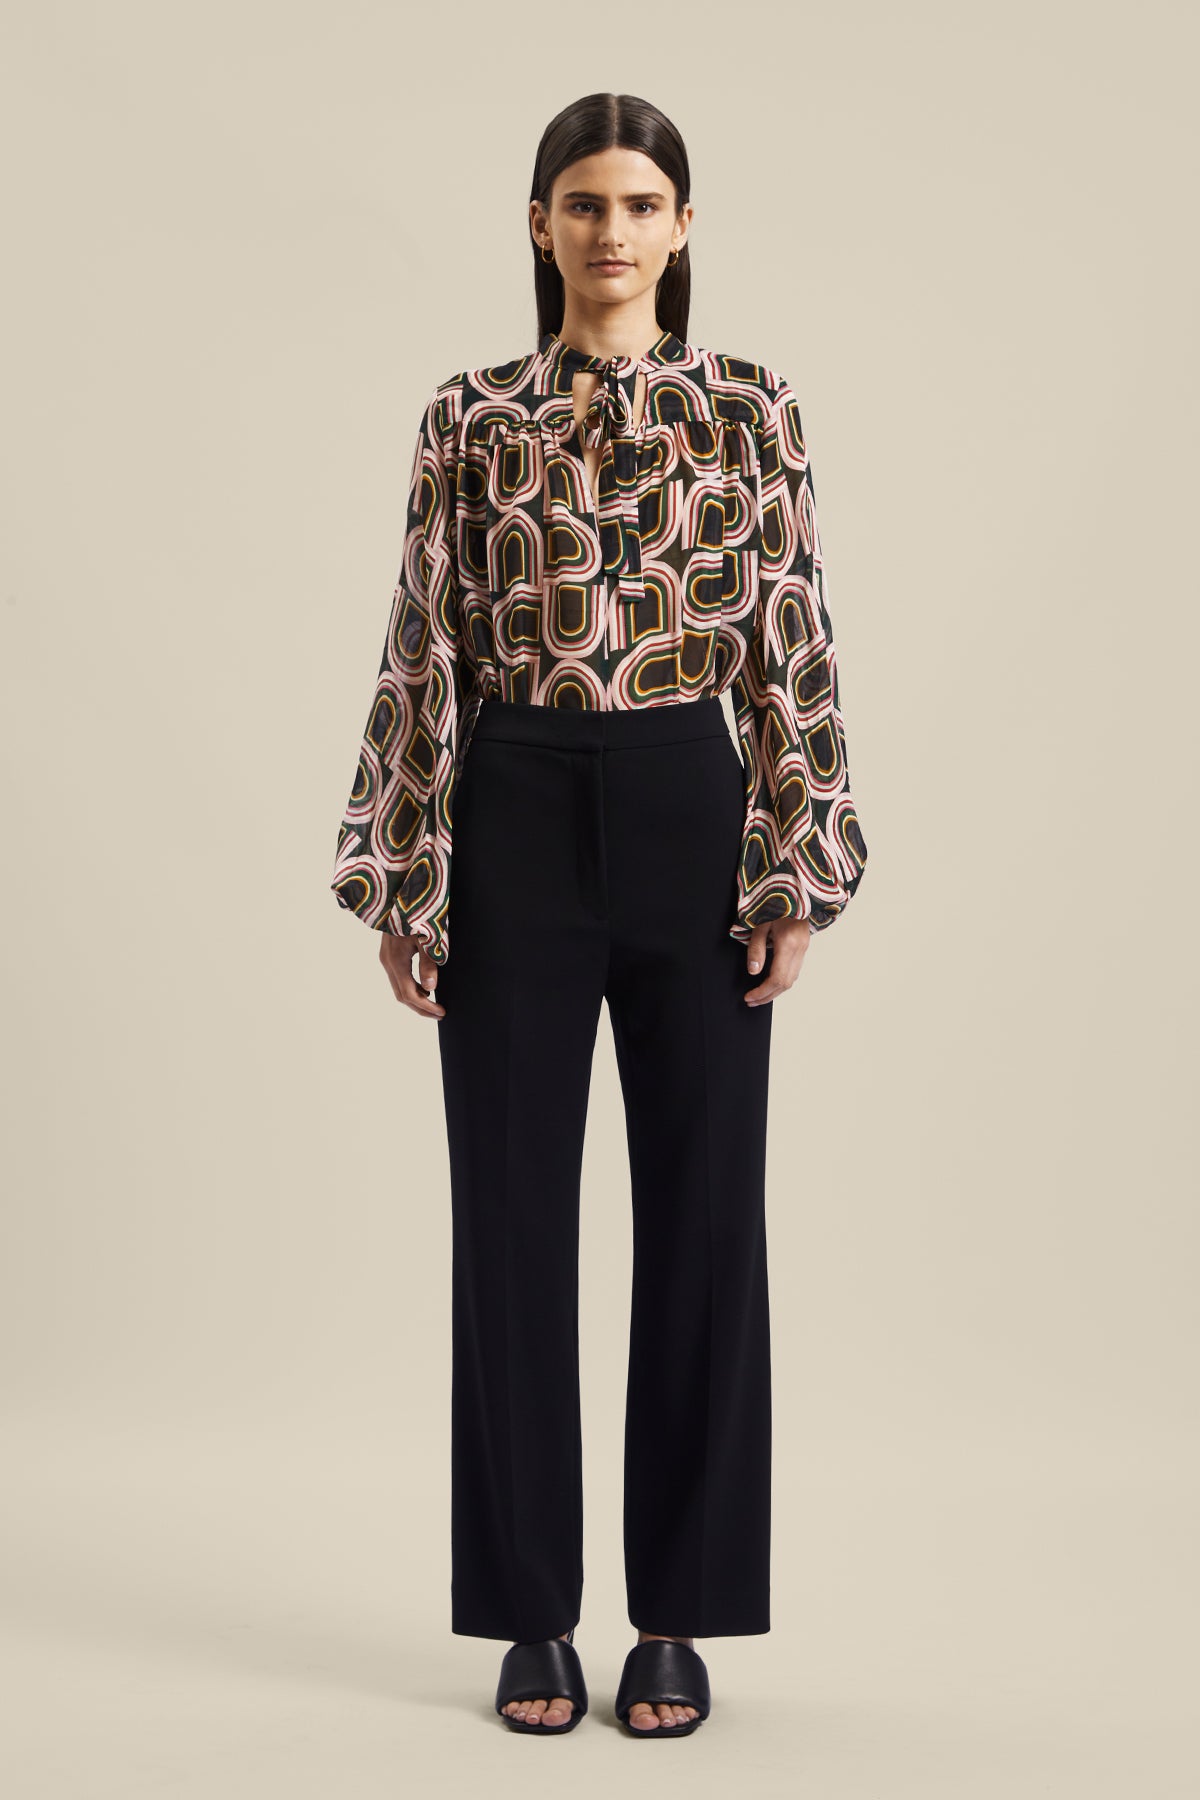 Model wearing the black women’s Rhetoric Pant from Australian Fashion Designer GINGER & SMART, featuring a slim fit, cropped straight leg with side pockets. Worn with the Kinship Blouse.